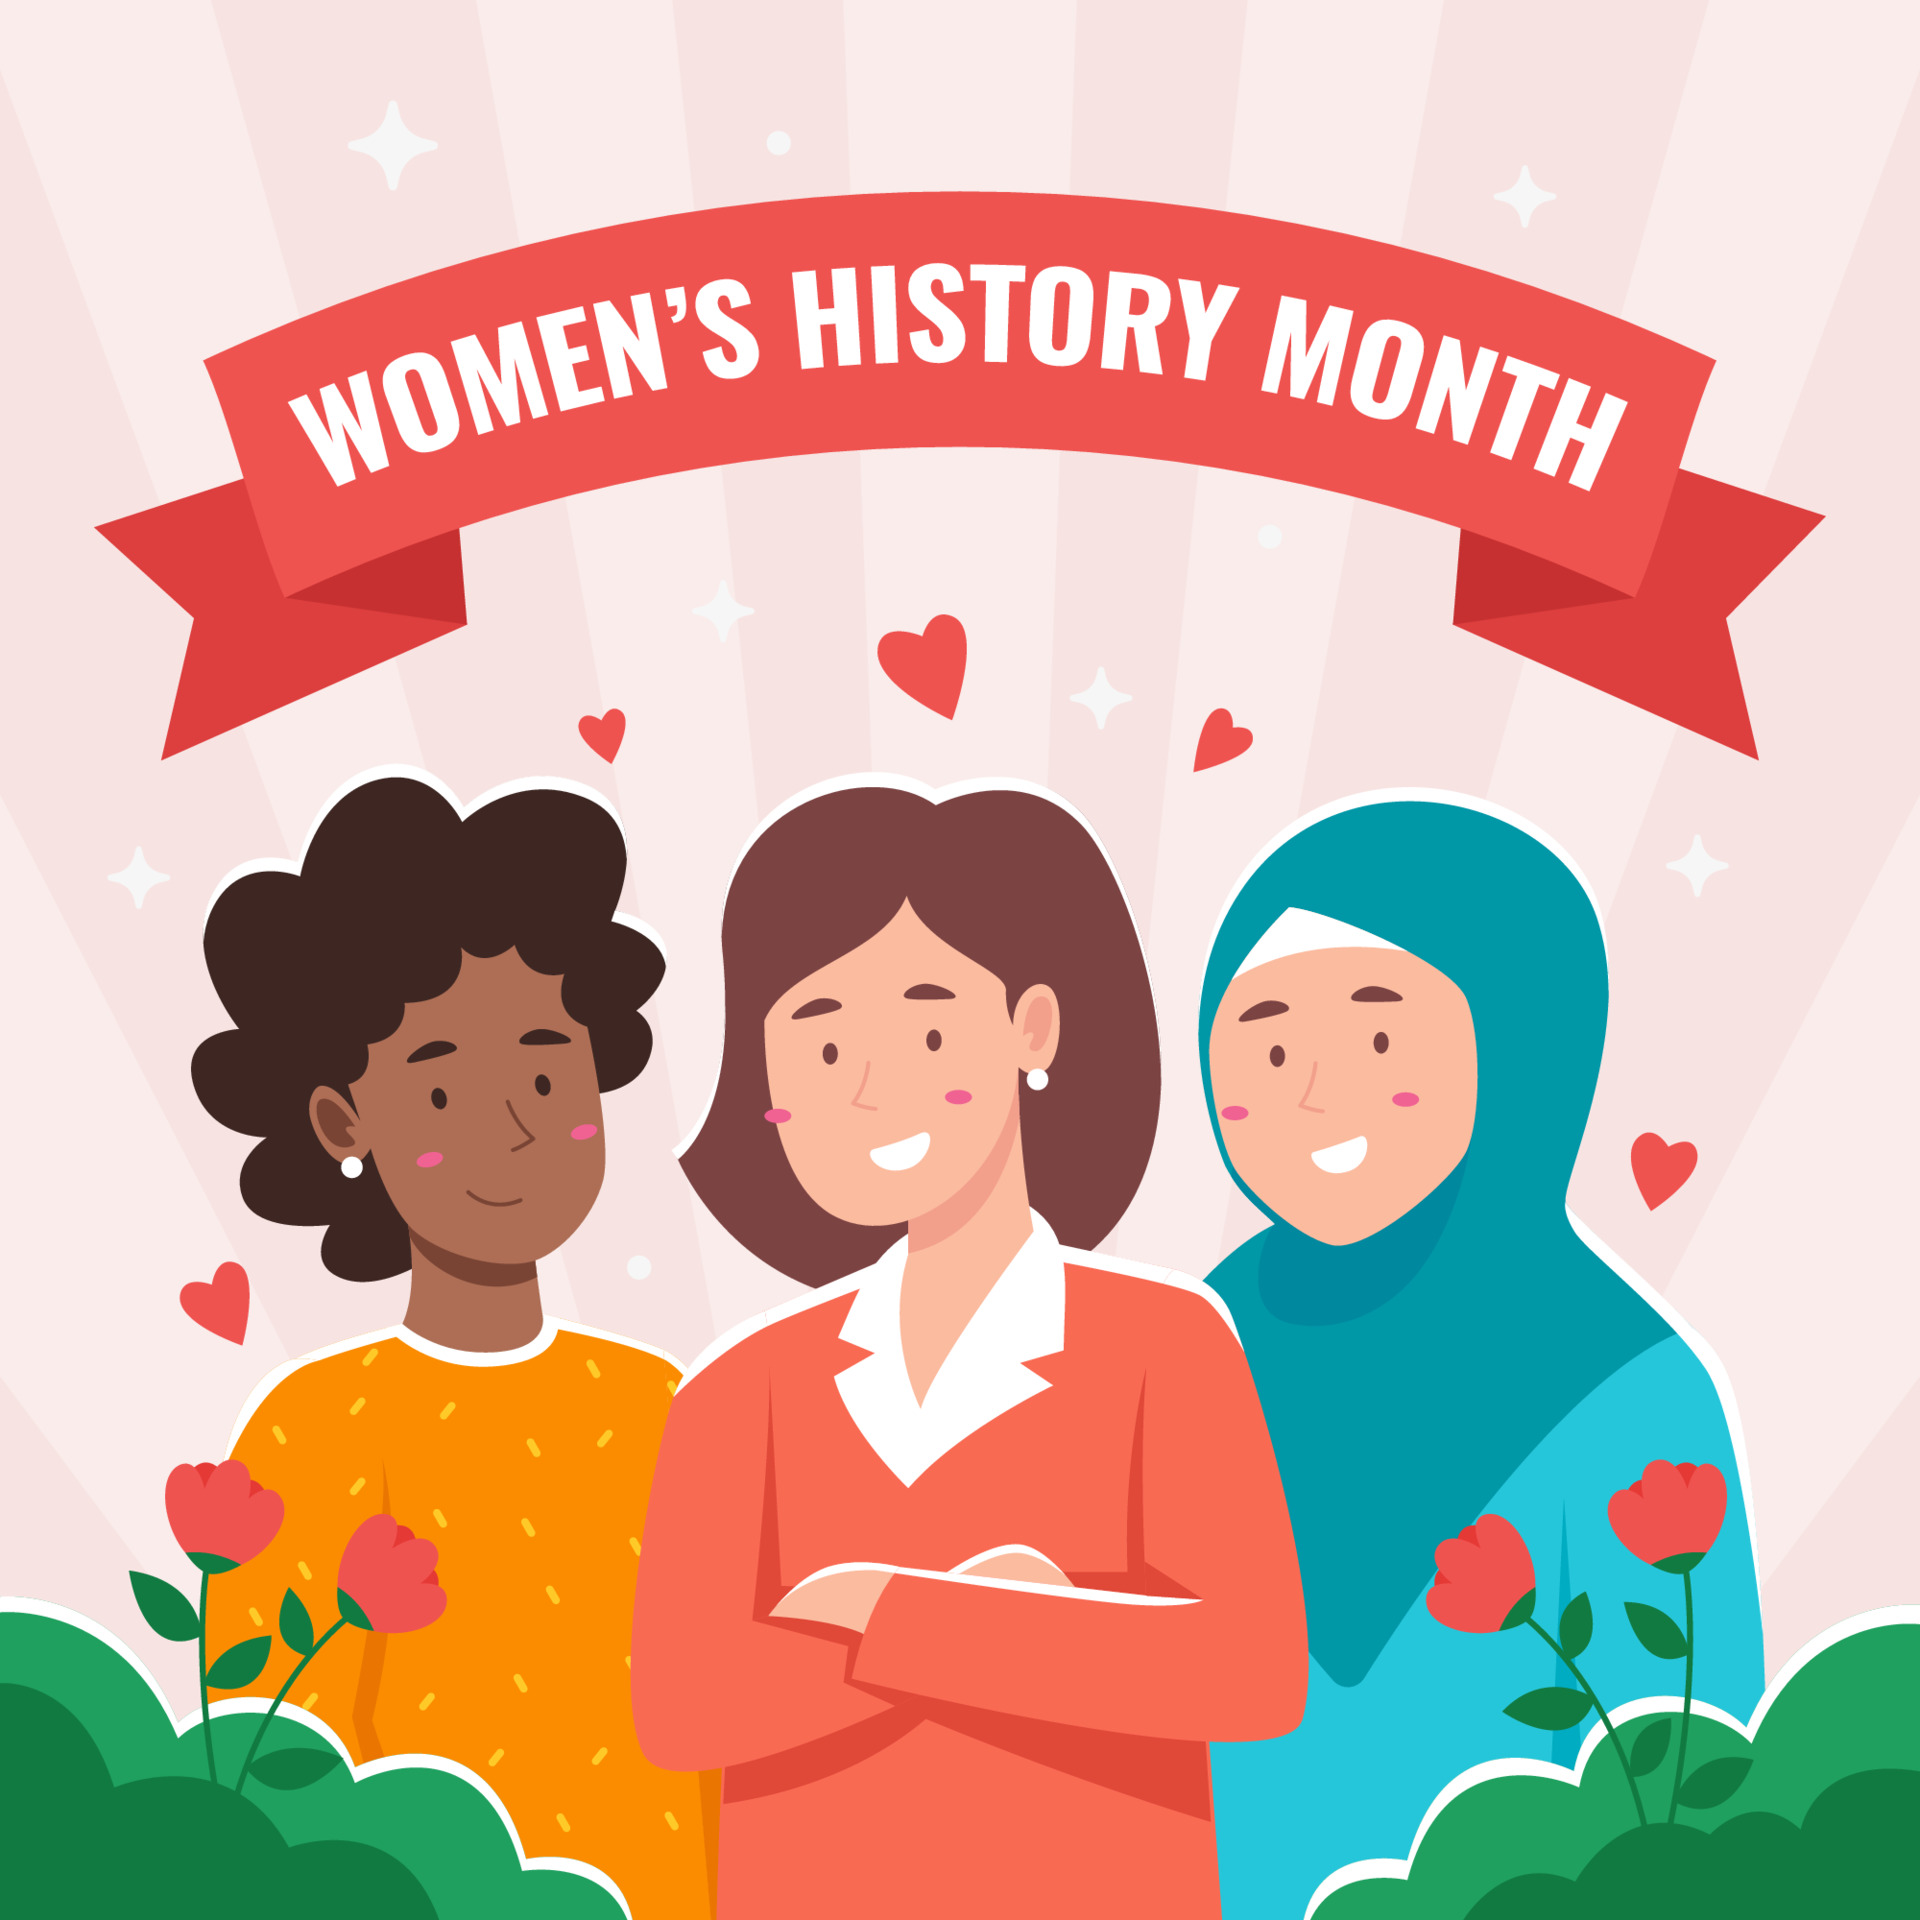 Thumbnail for the post titled: Women’s History Month Drop-in